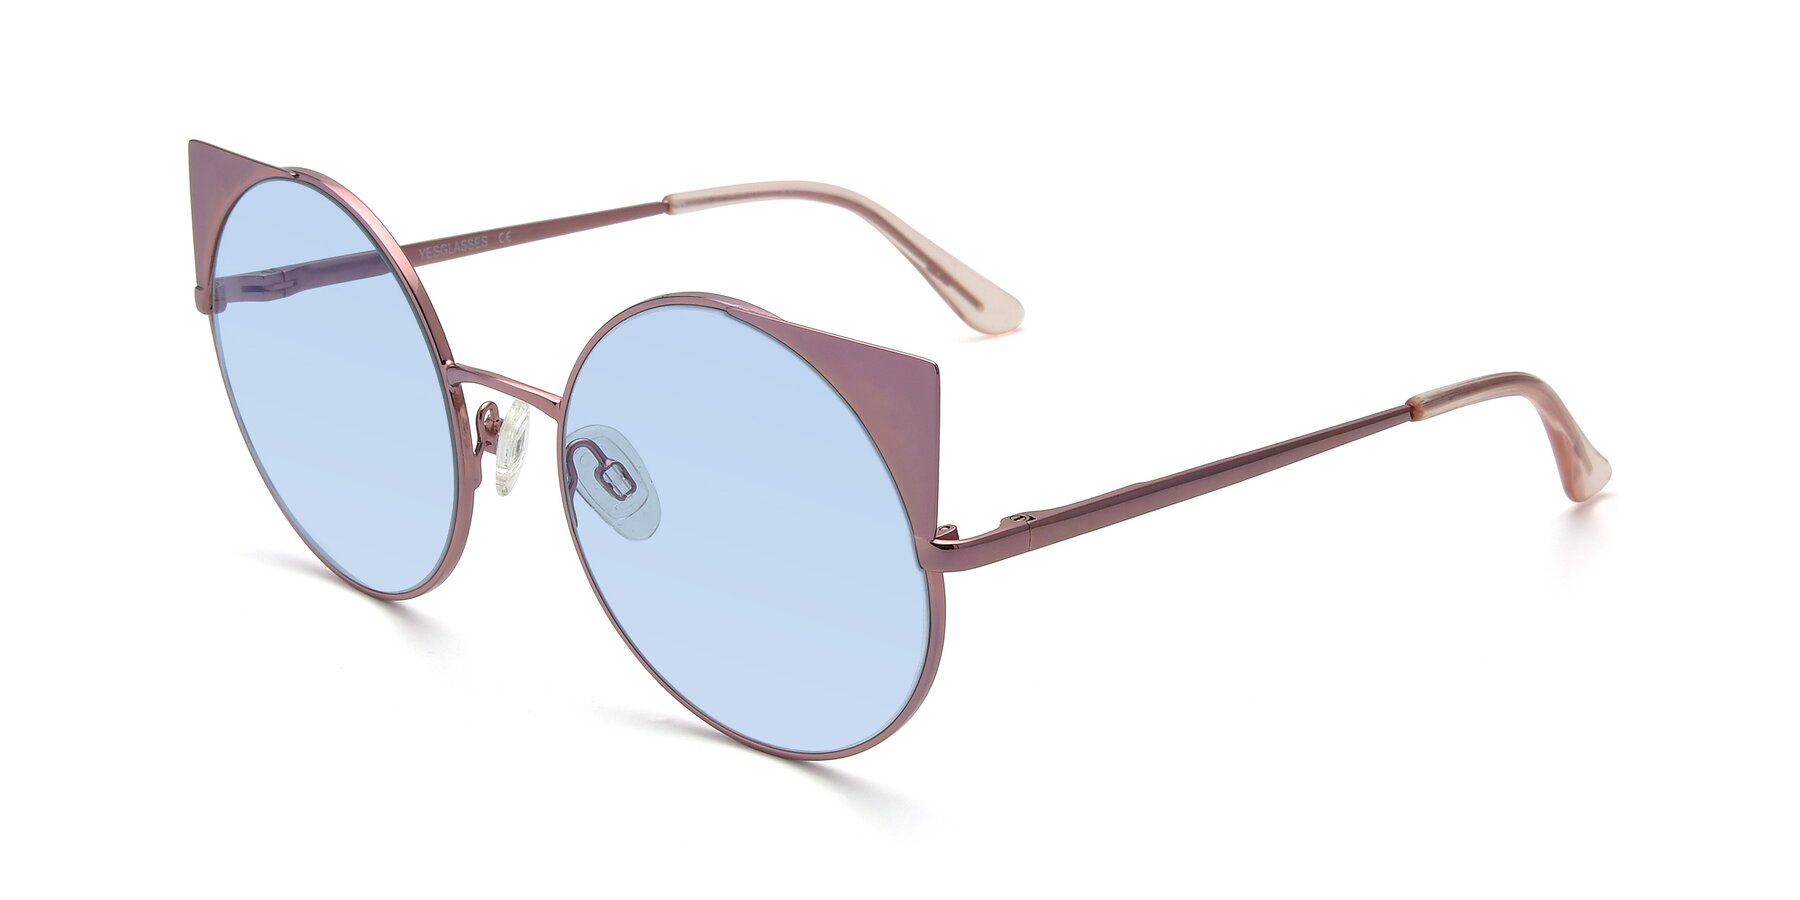 Angle of SSR1955 in Pink with Light Blue Tinted Lenses